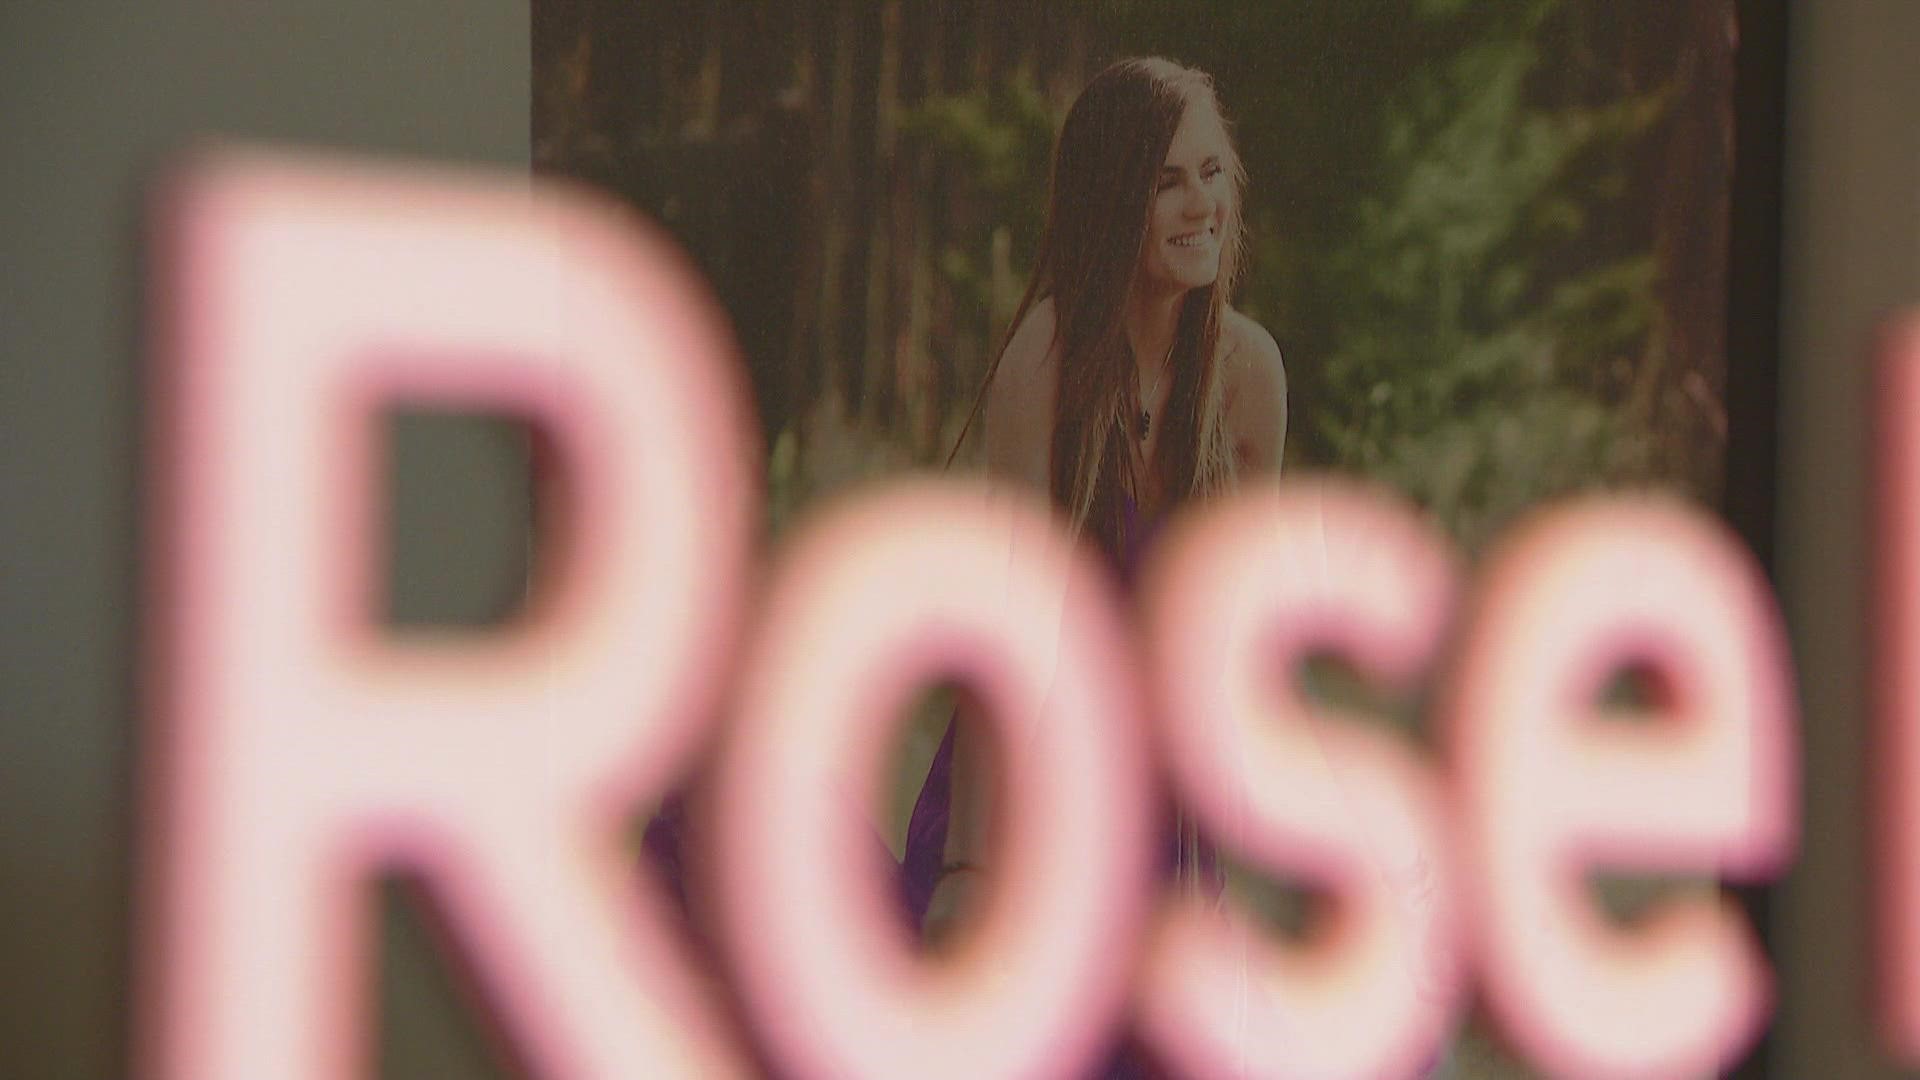 John and Karla Tartz have backgrounds in business and law, but they plan to open 'Rose NeuroSpa' mental health clinic in Lone Tree as a tribute to their daughter.